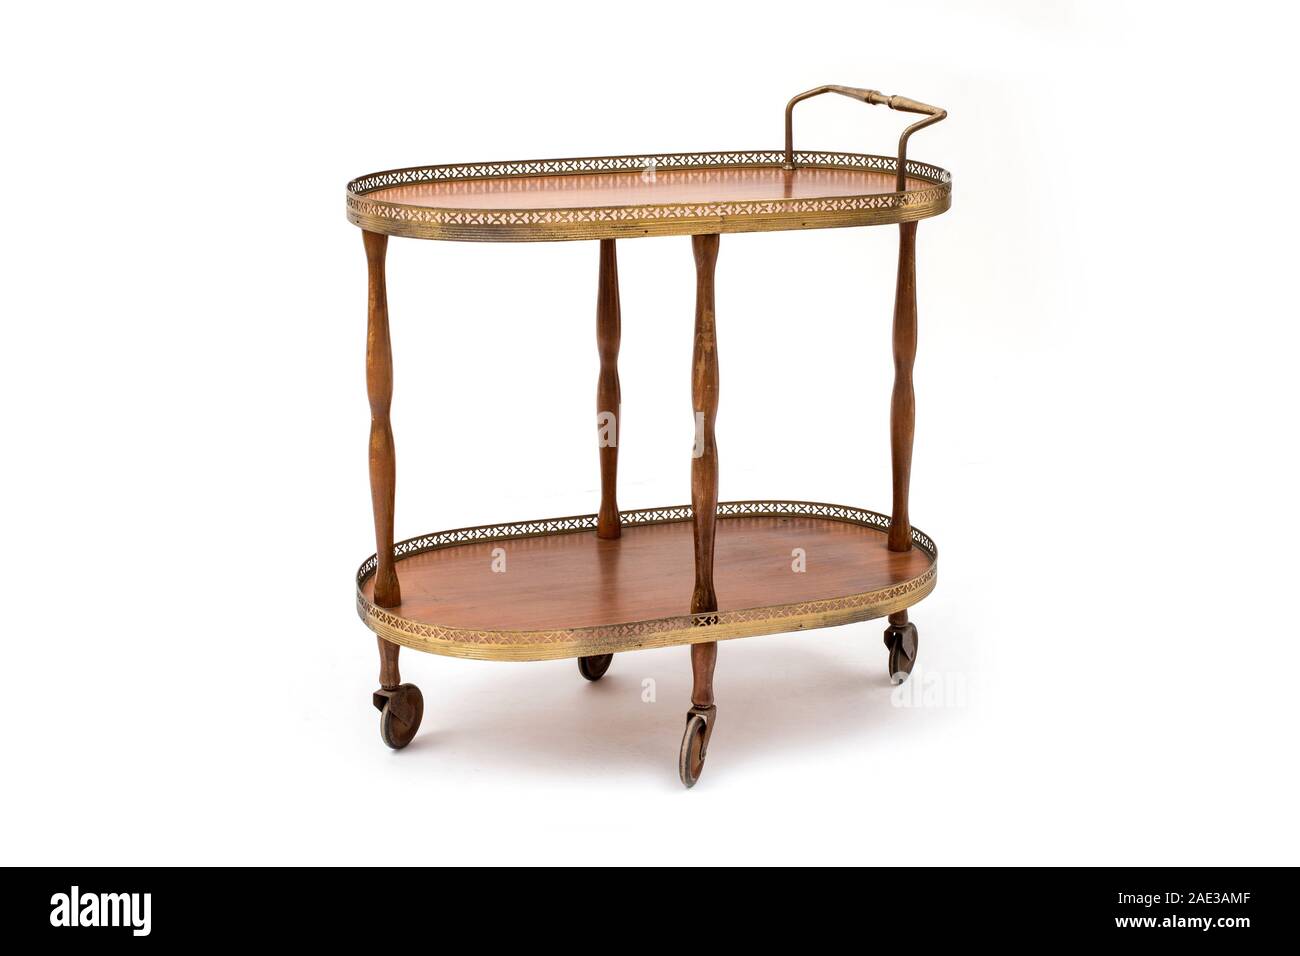 Antique serving trolley on wheels, decorated with galleries Stock Photo